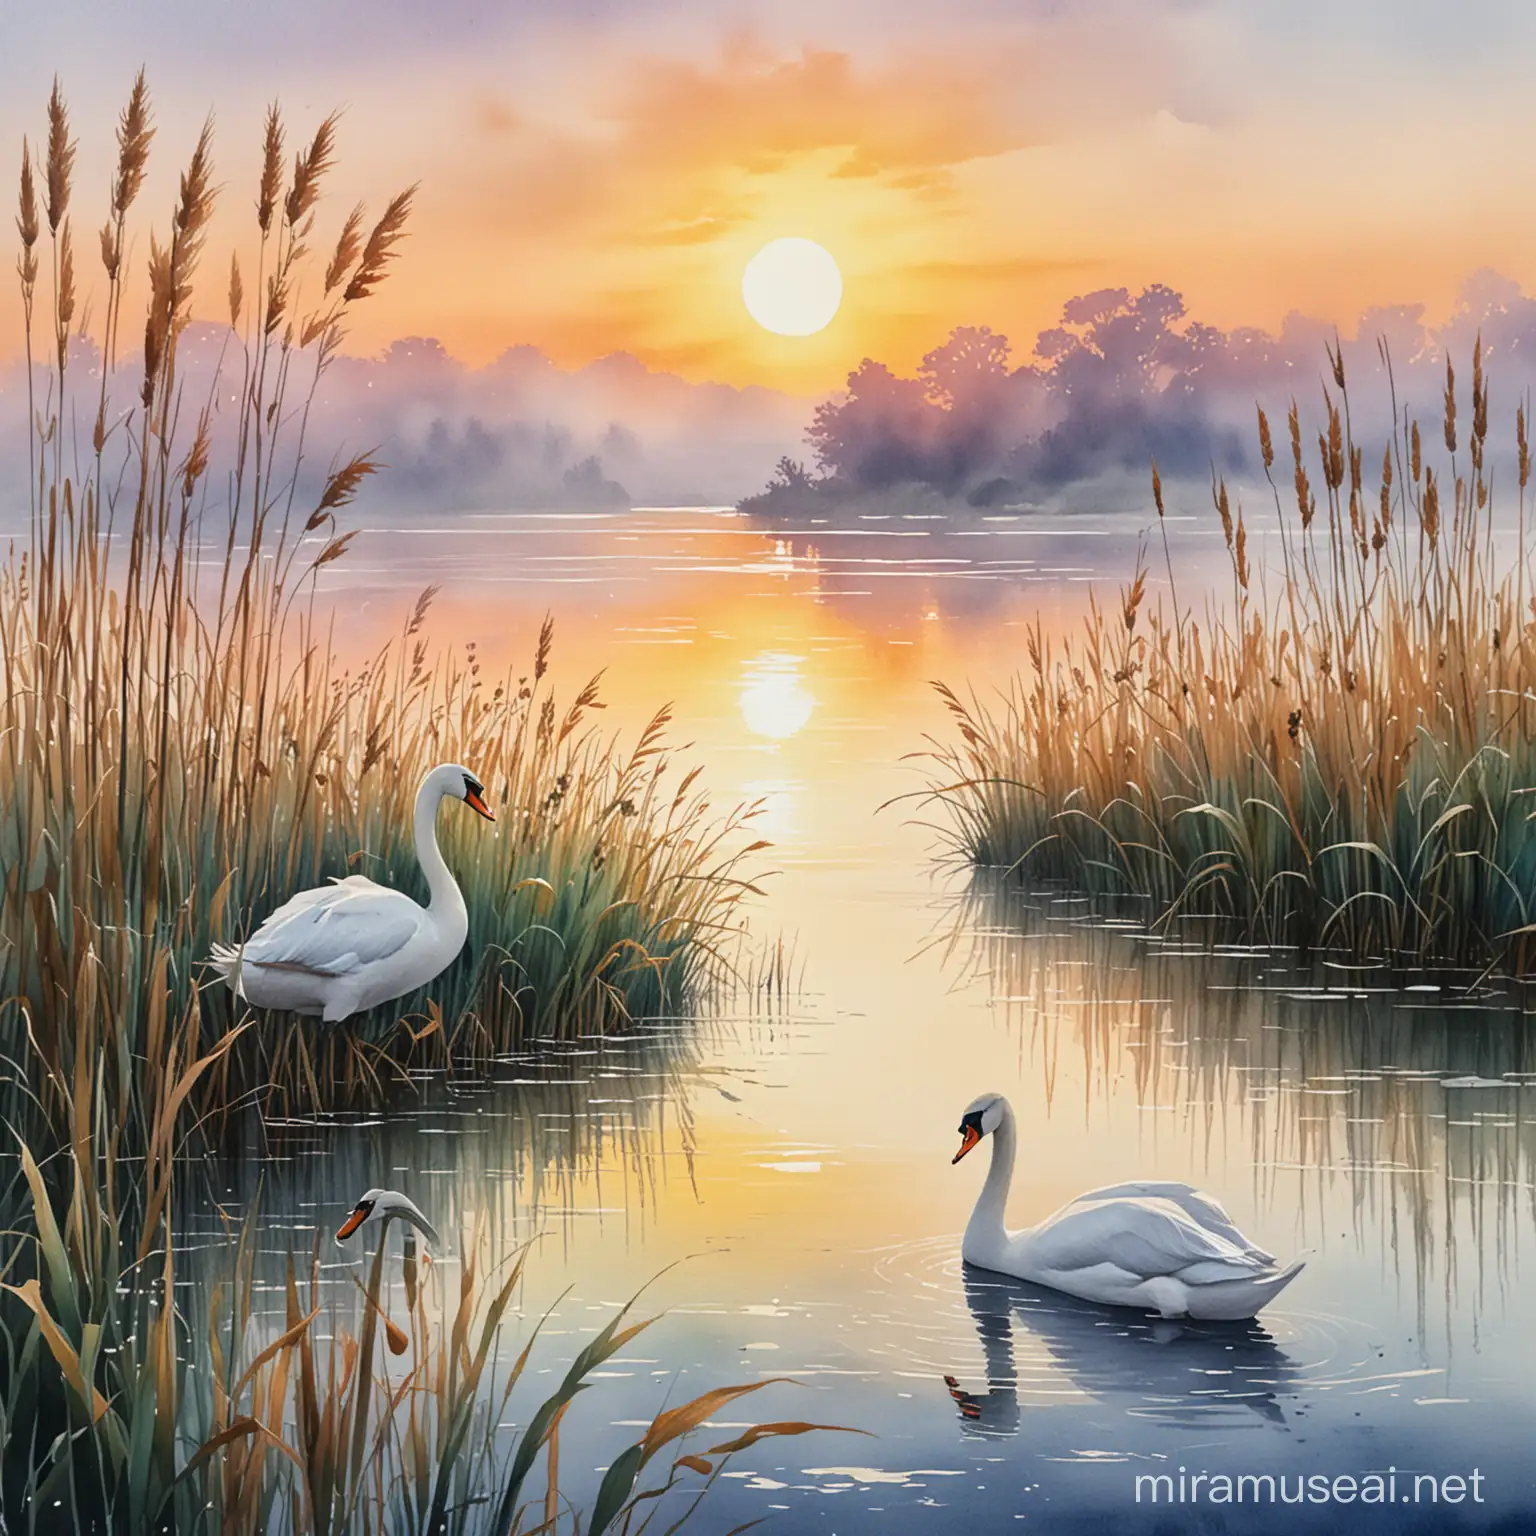 Make a watercolor painting. The lakeshore is sandy and reeds grow in the water. It's sunrise time and mist rises from the water. Two swans swim behind the reeds.